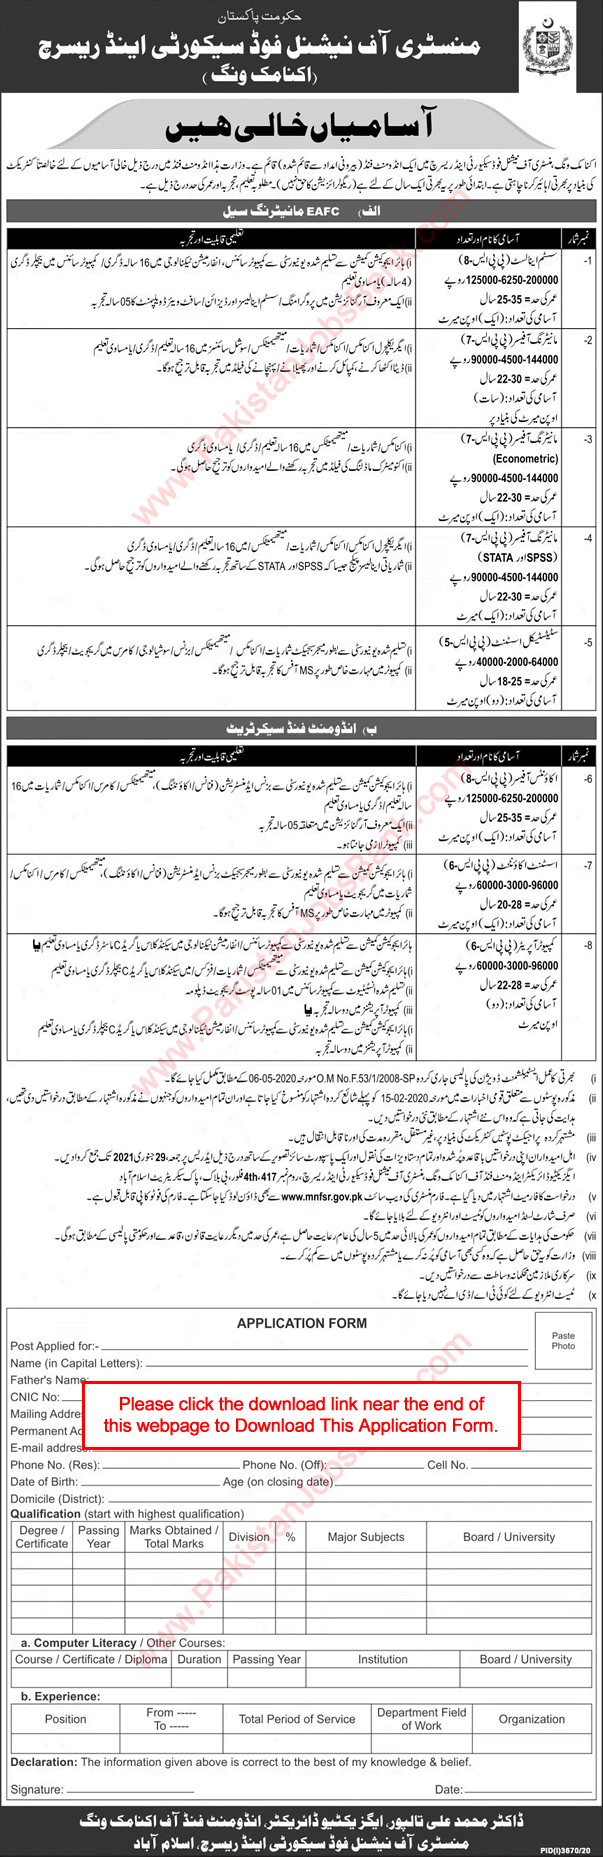 Ministry of National Food Security and Research Jobs 2021 MNFSR Application Form Latest